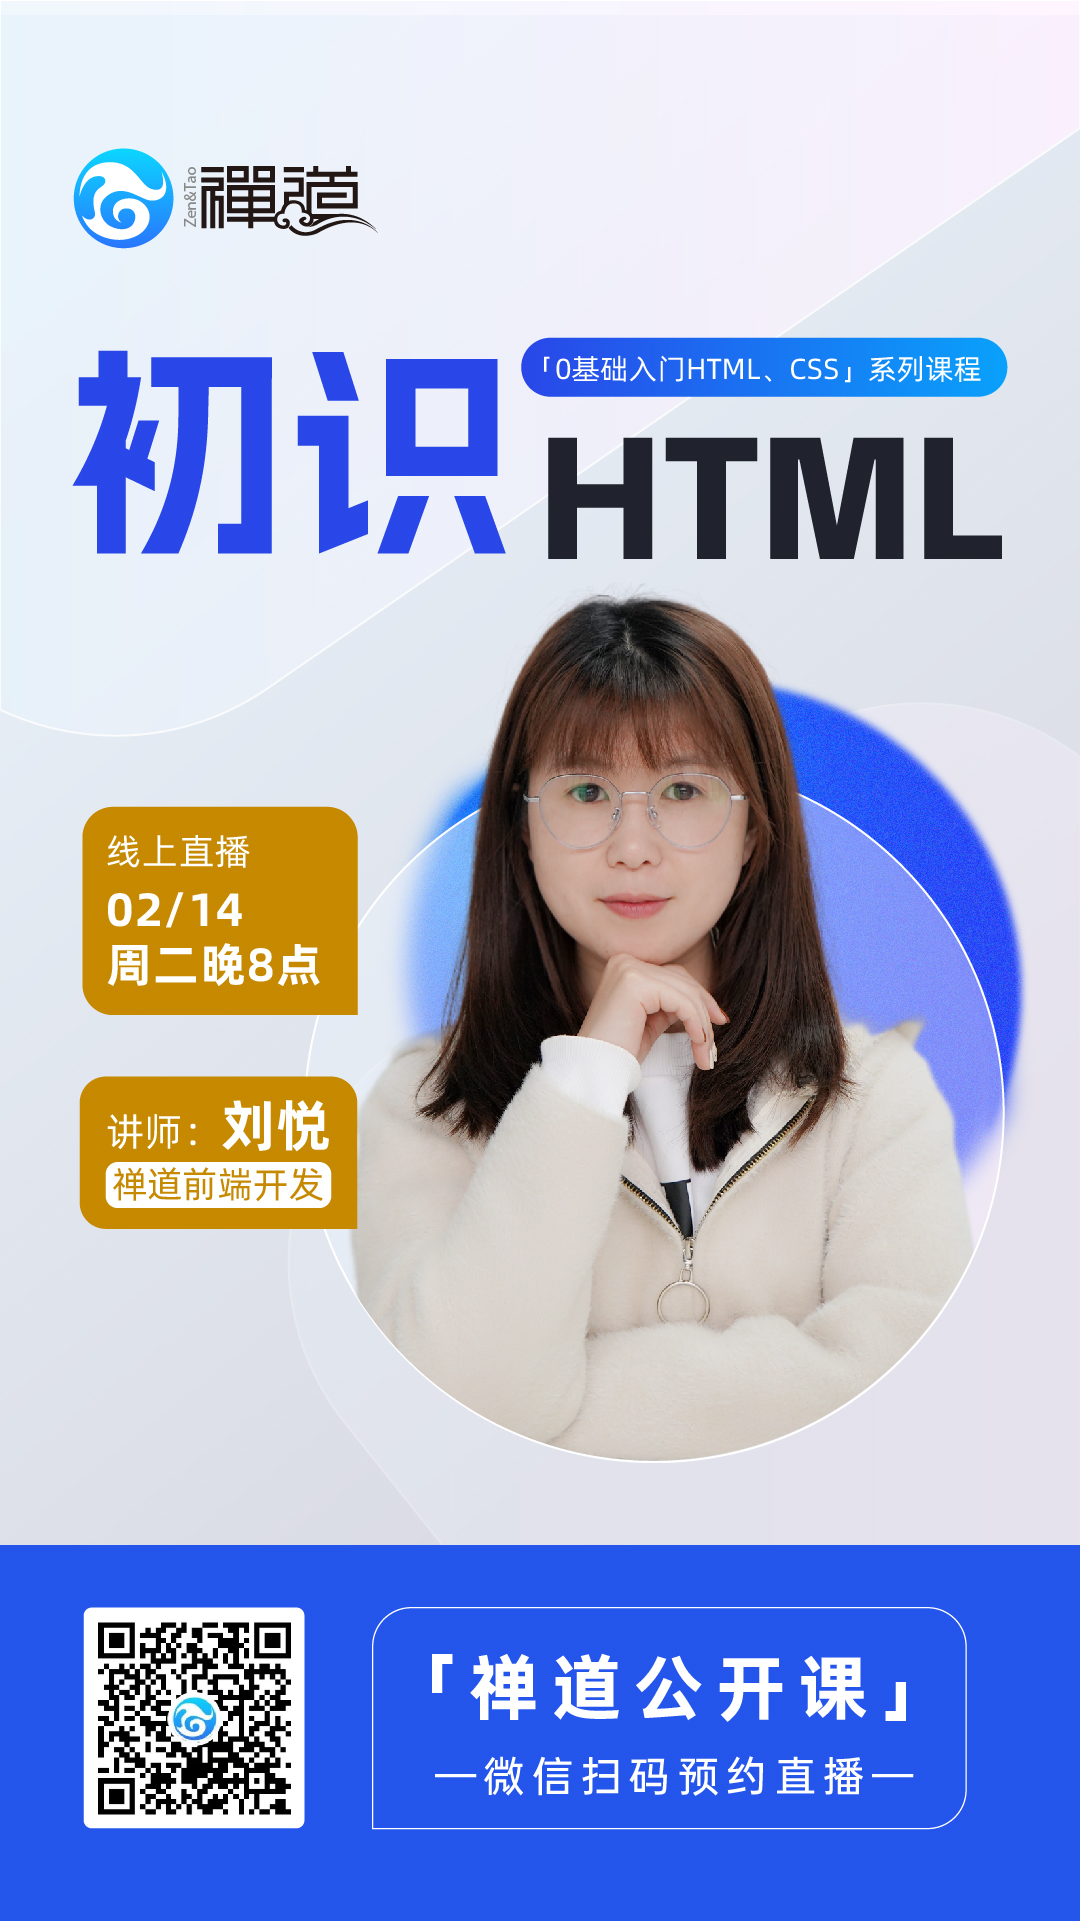 2.14Getting to know HTML